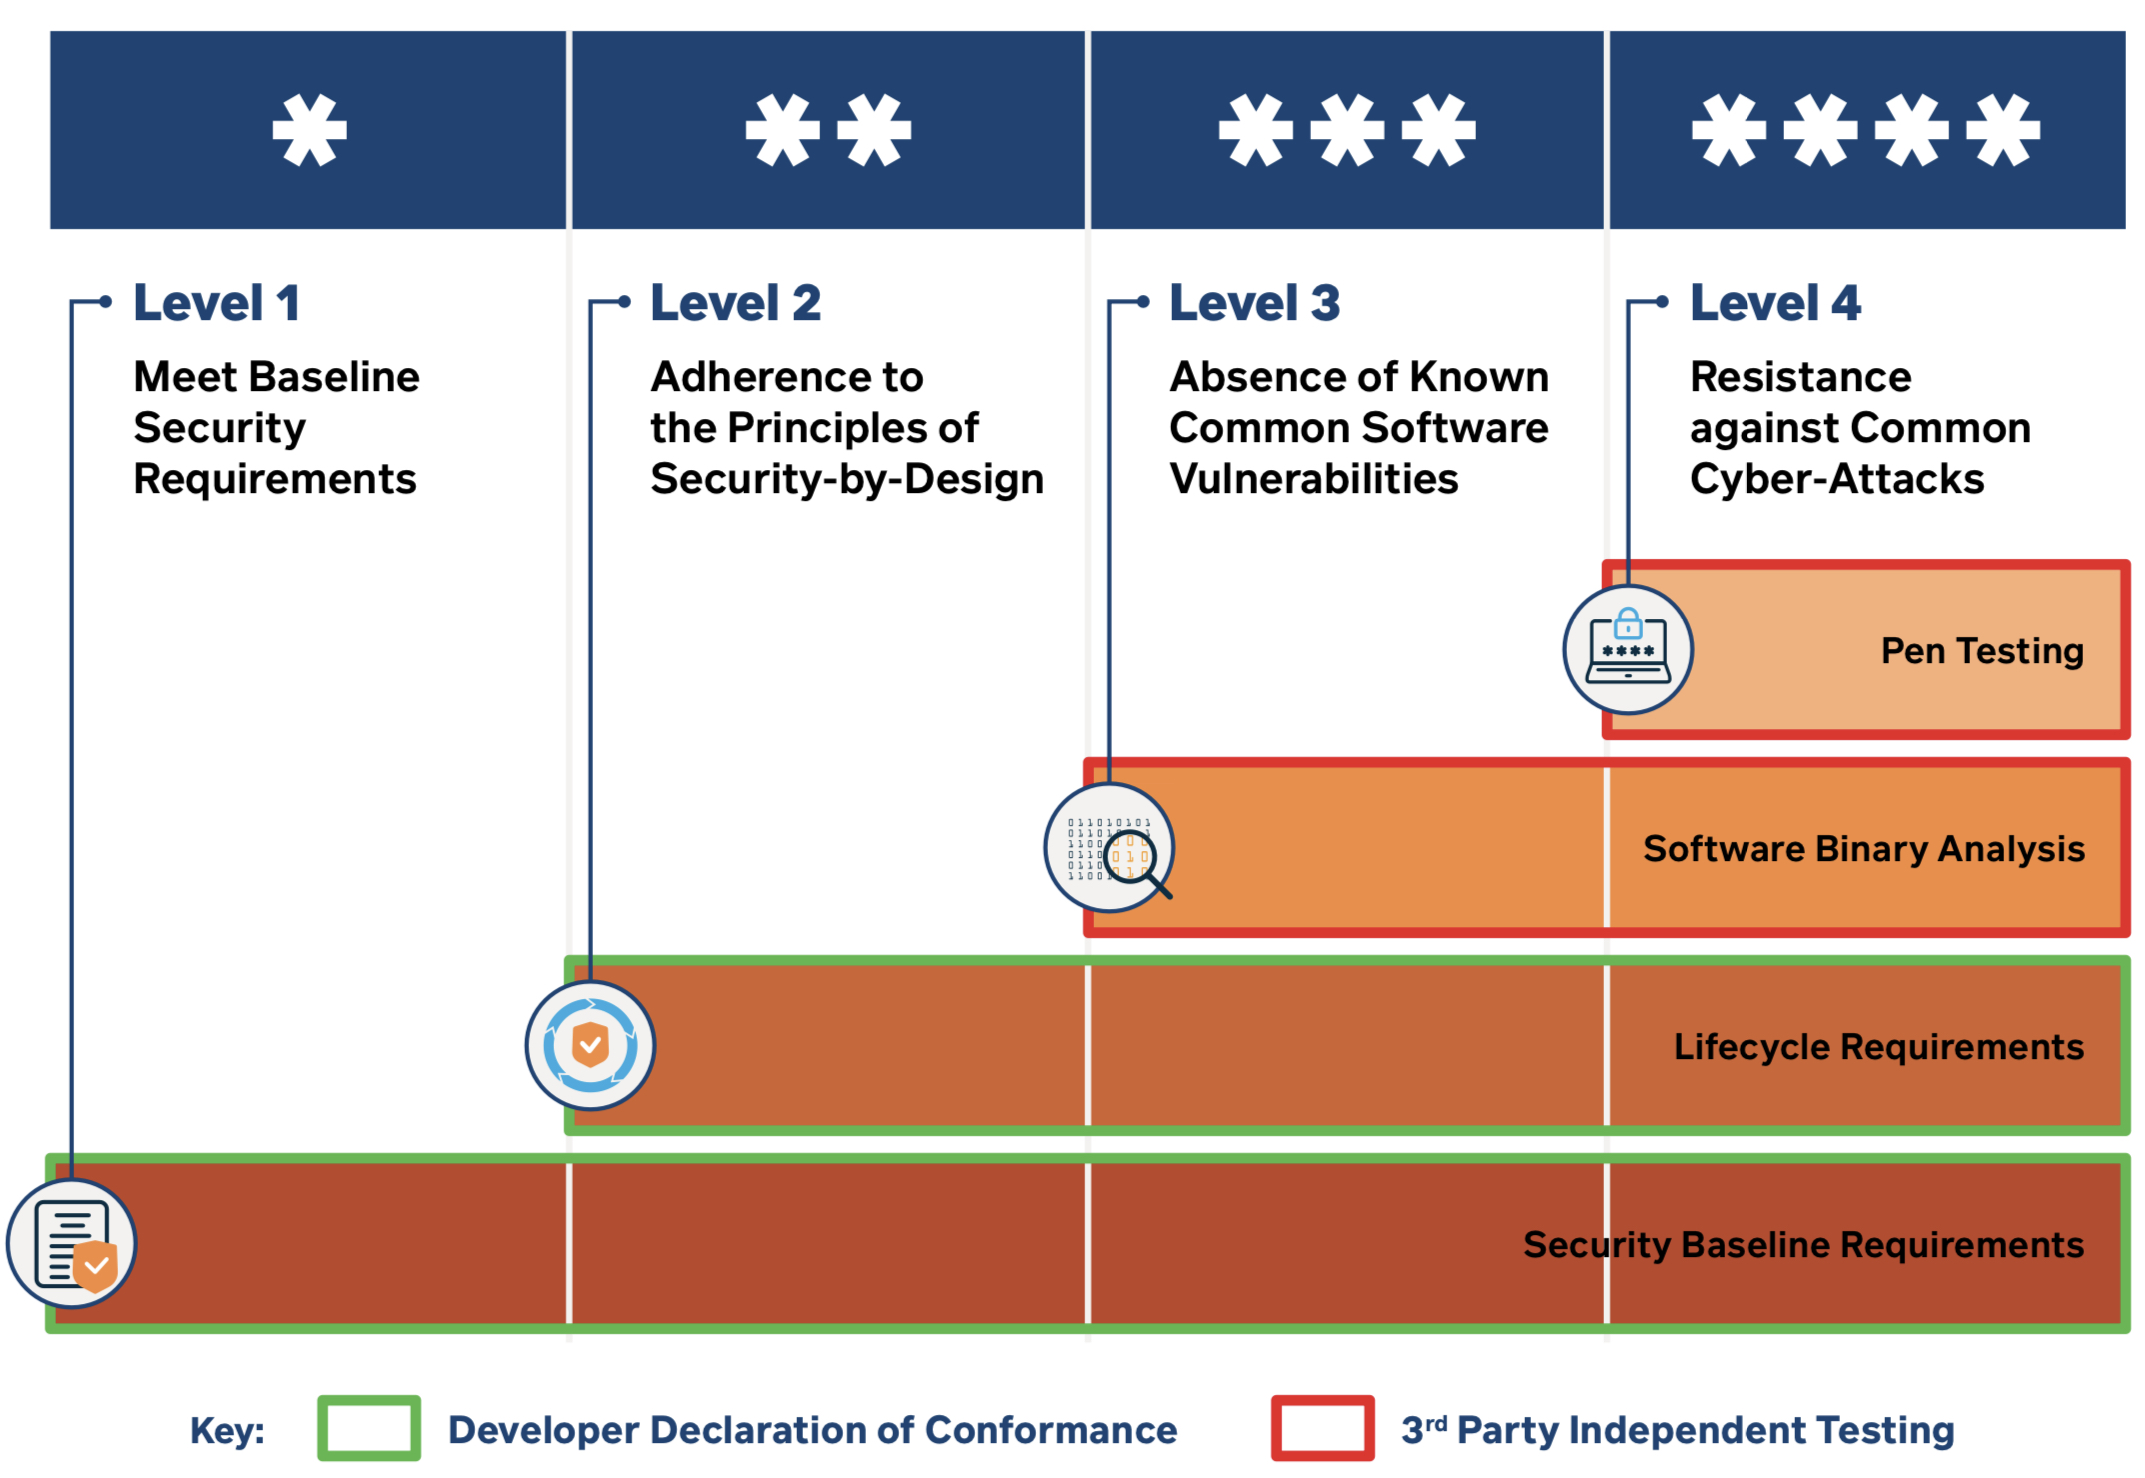 The Cybersecurity Labeling Scheme in Singapore, where consumer devices received one out of four points based on their security practices.